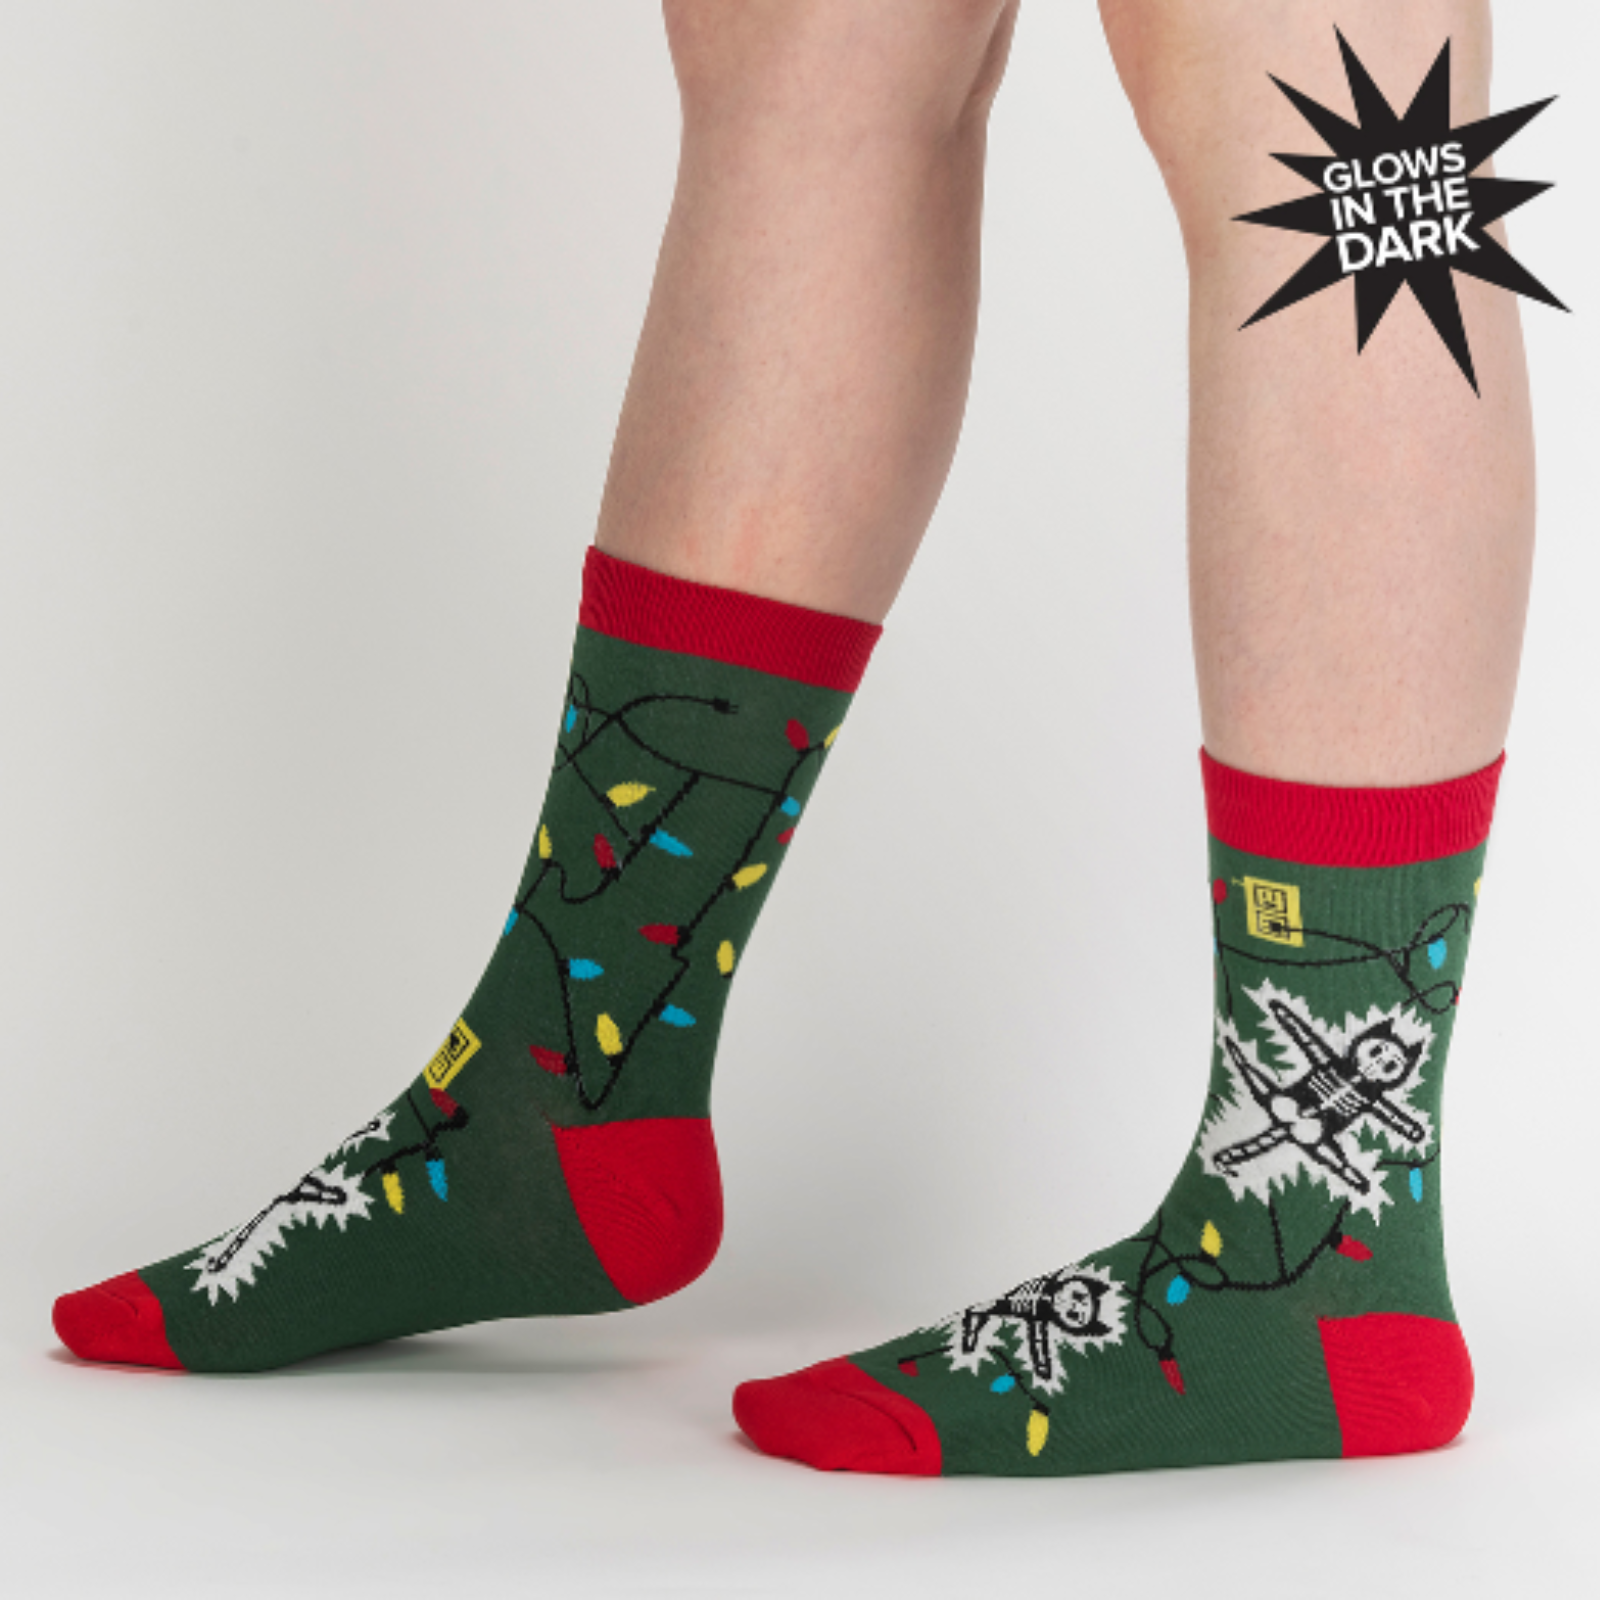 Sock It To Me Eating Light This Holiday (GLOWS IN THE DARK) women's and men's crew socks featuring green sock with red cuff, heel, and toe with cartoon cat being electrocuted by Christmas lights. Socks worn by female model seen from side. 